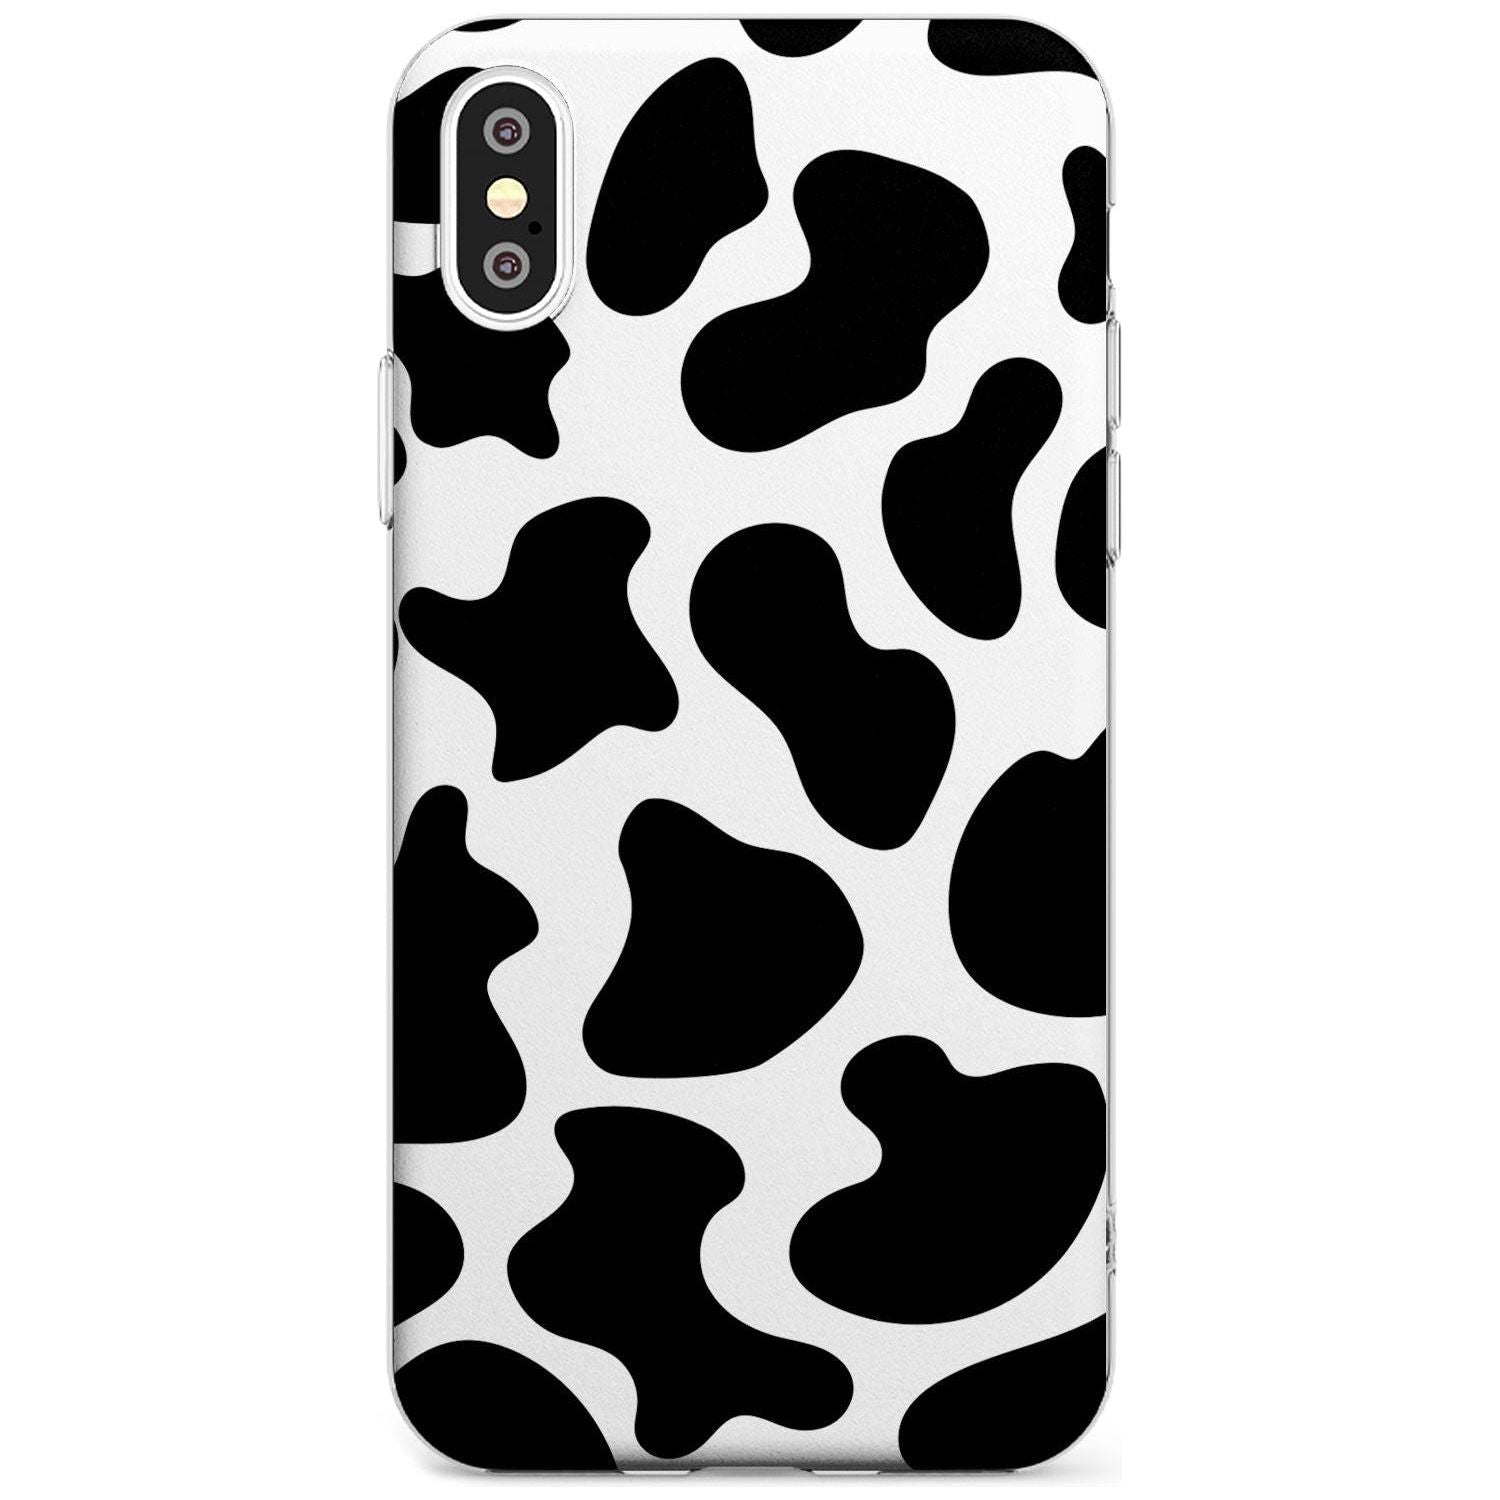 Cow Print Black Impact Phone Case for iPhone X XS Max XR